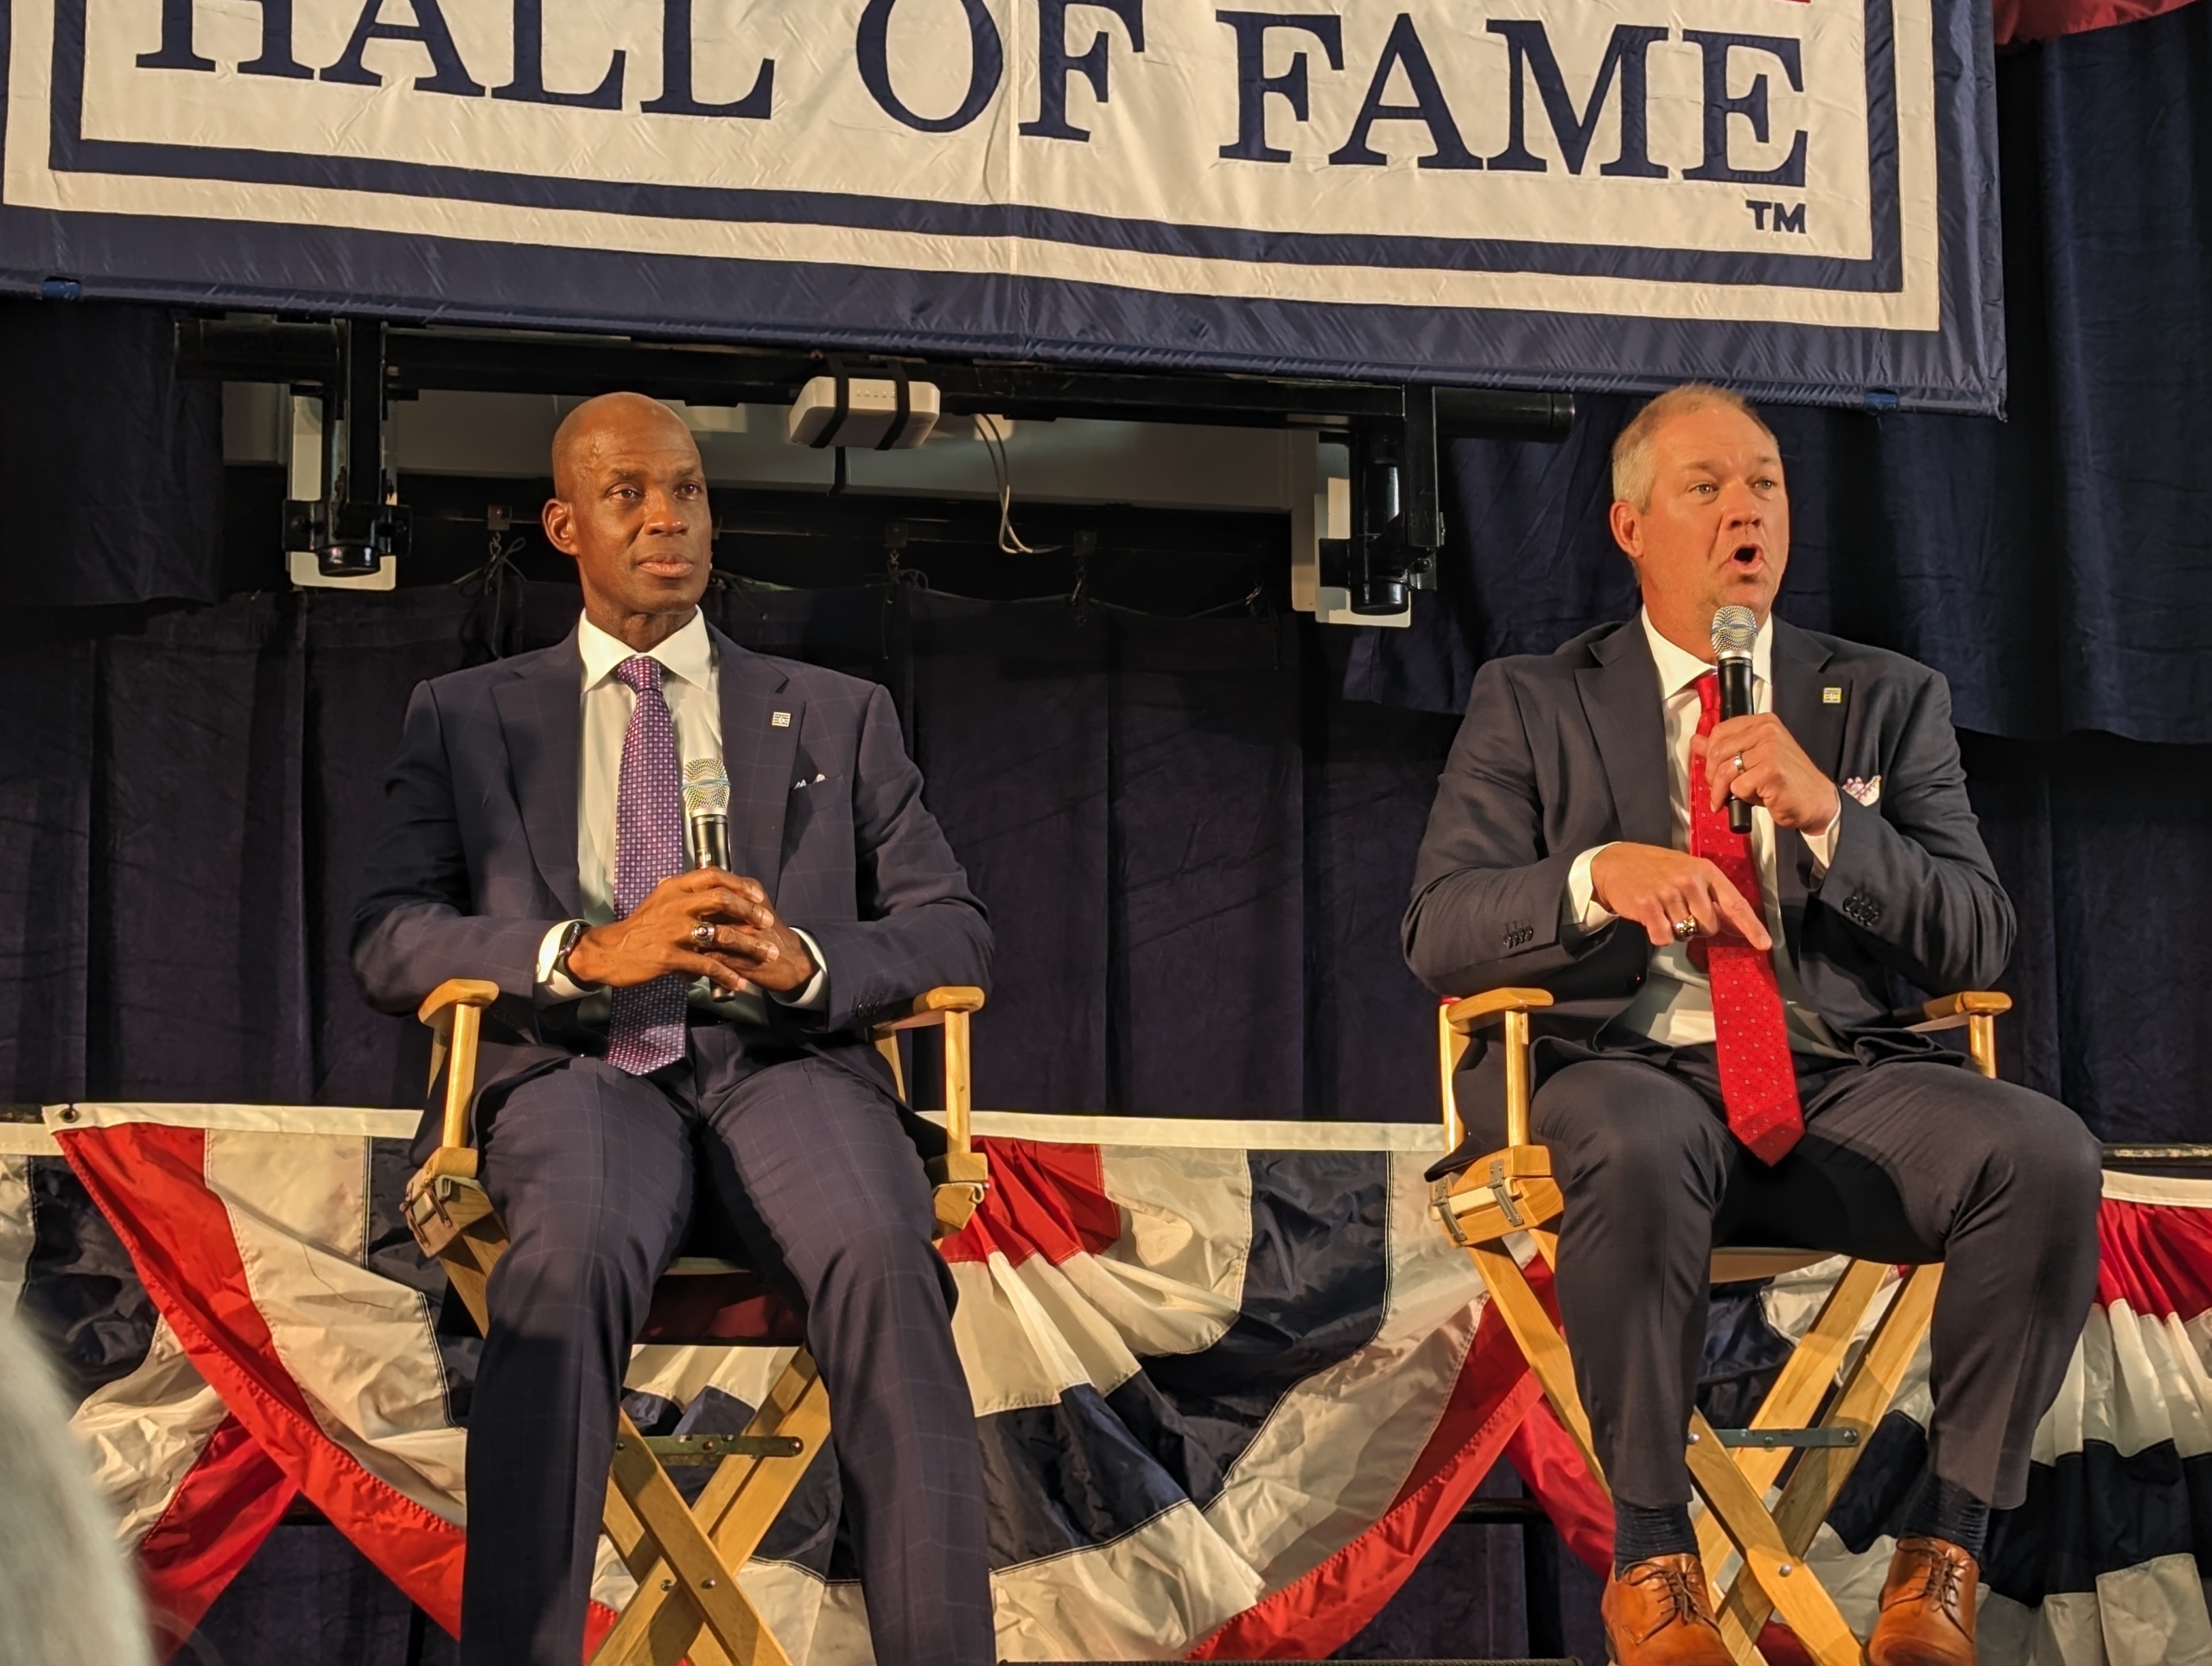 Tampa honors new Baseball HOF inductee Fred McGriff